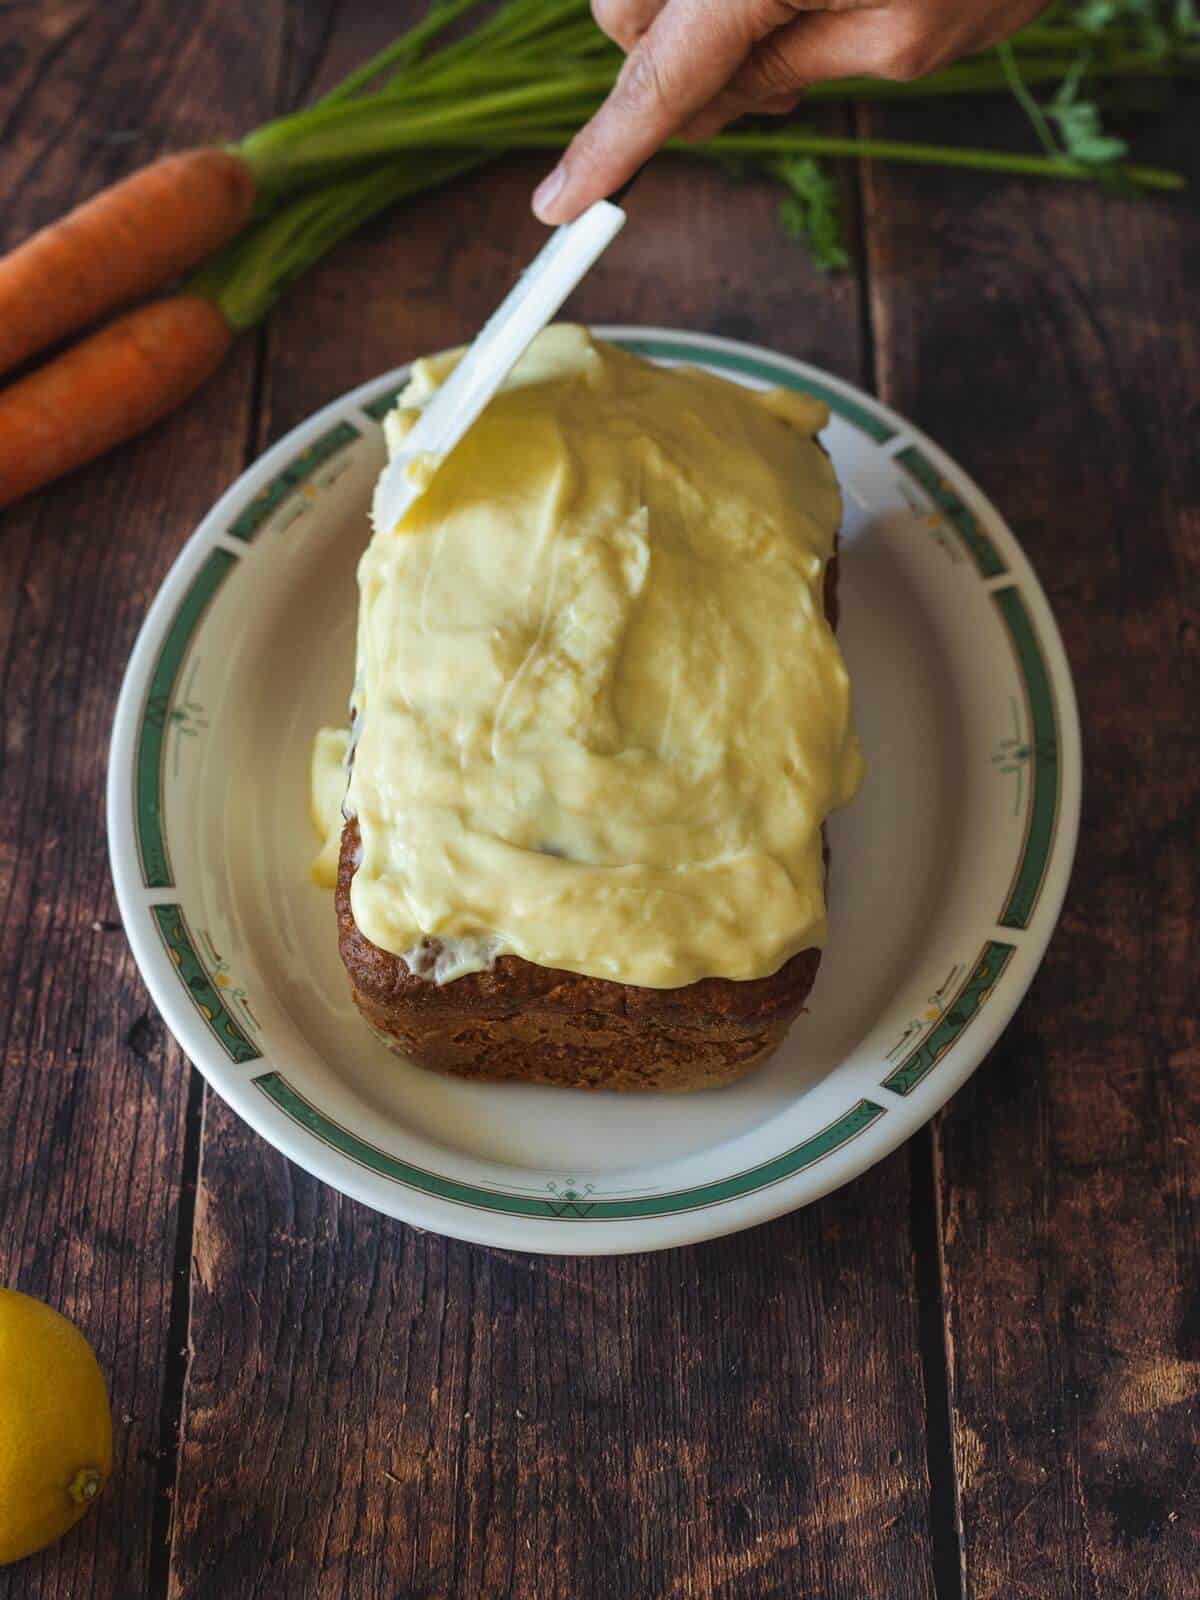 adding frosting on top of the carrot cake